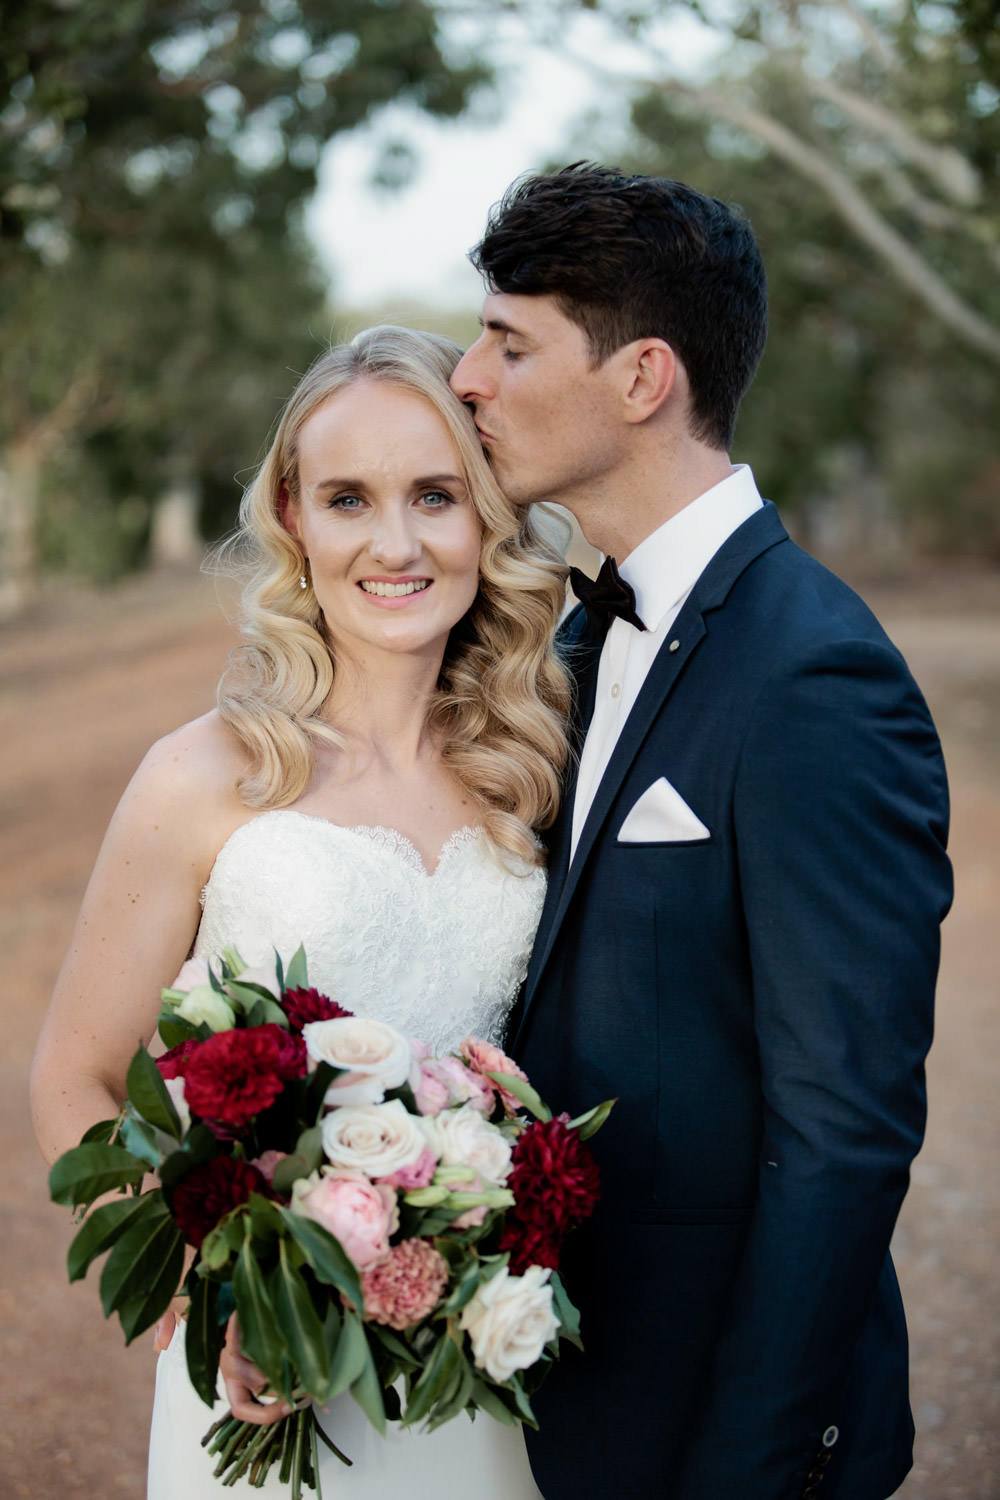 sunset-bridal-party-natural, fun, romantic-wedding-photography at Spicers-hiddenvale-QuinceandMulberryStudios